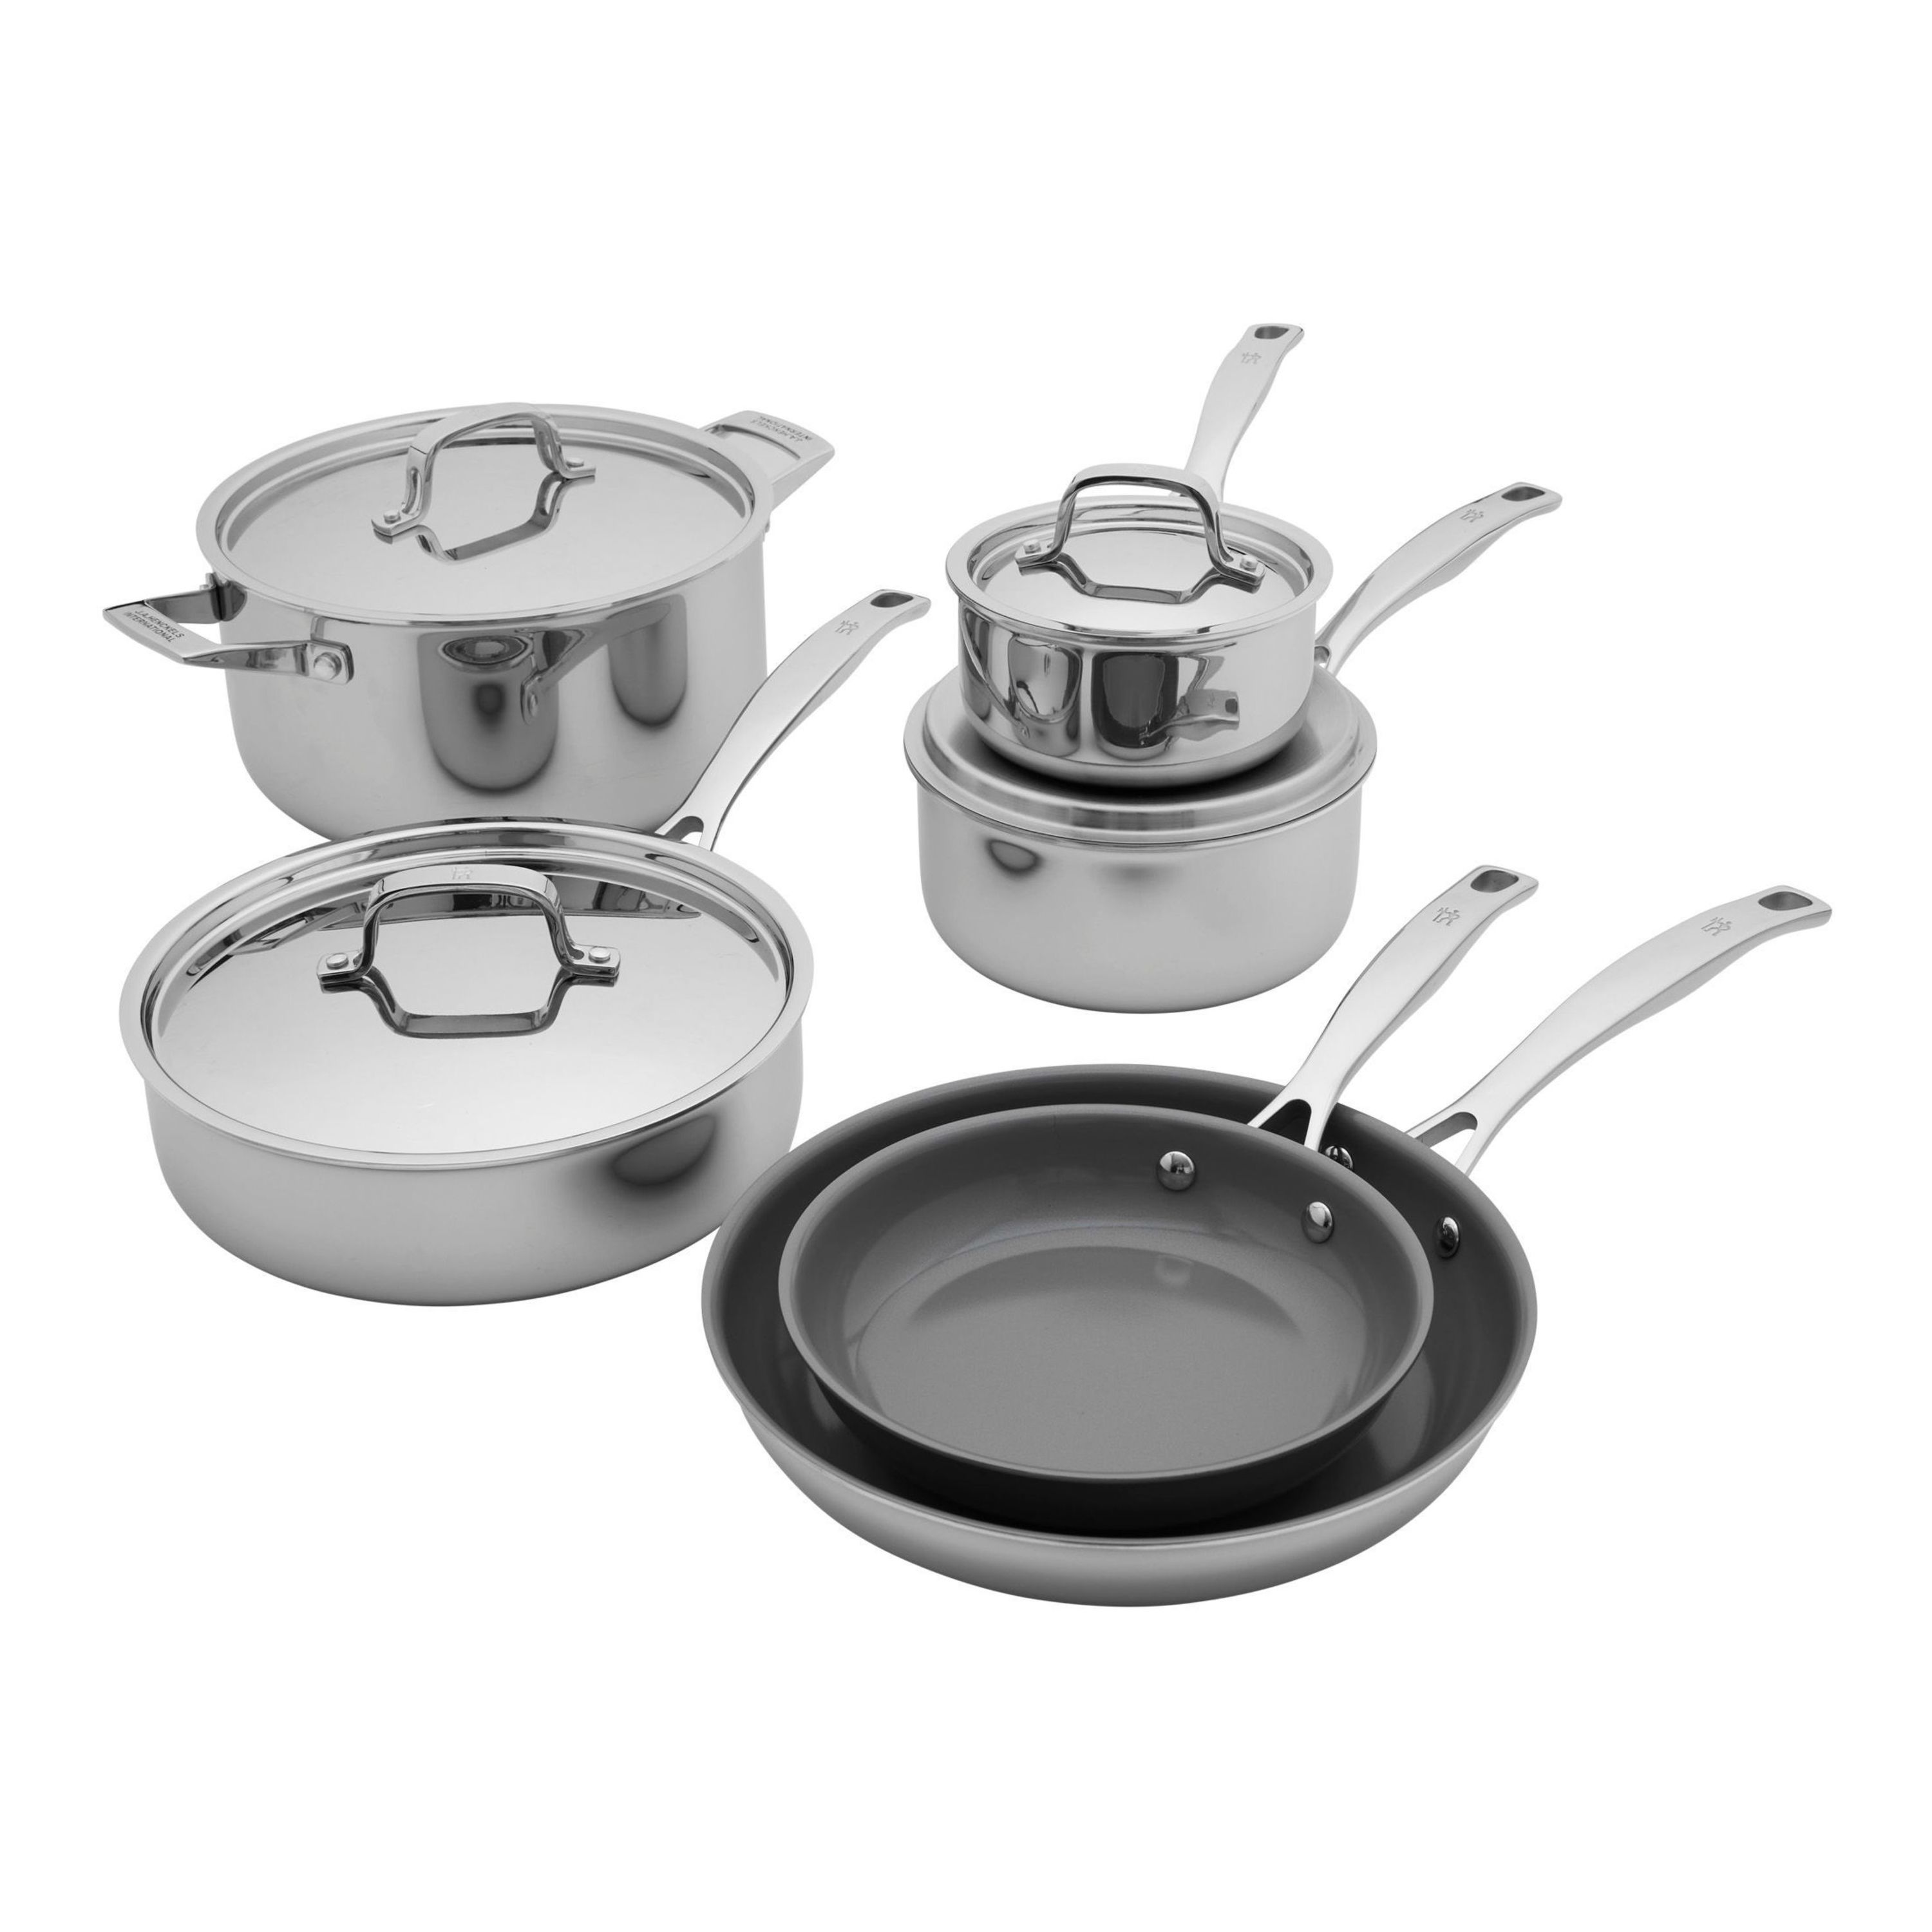 3-Ply Stainless Clad Pro 10pc Ceramic Nonstick Cookware Set